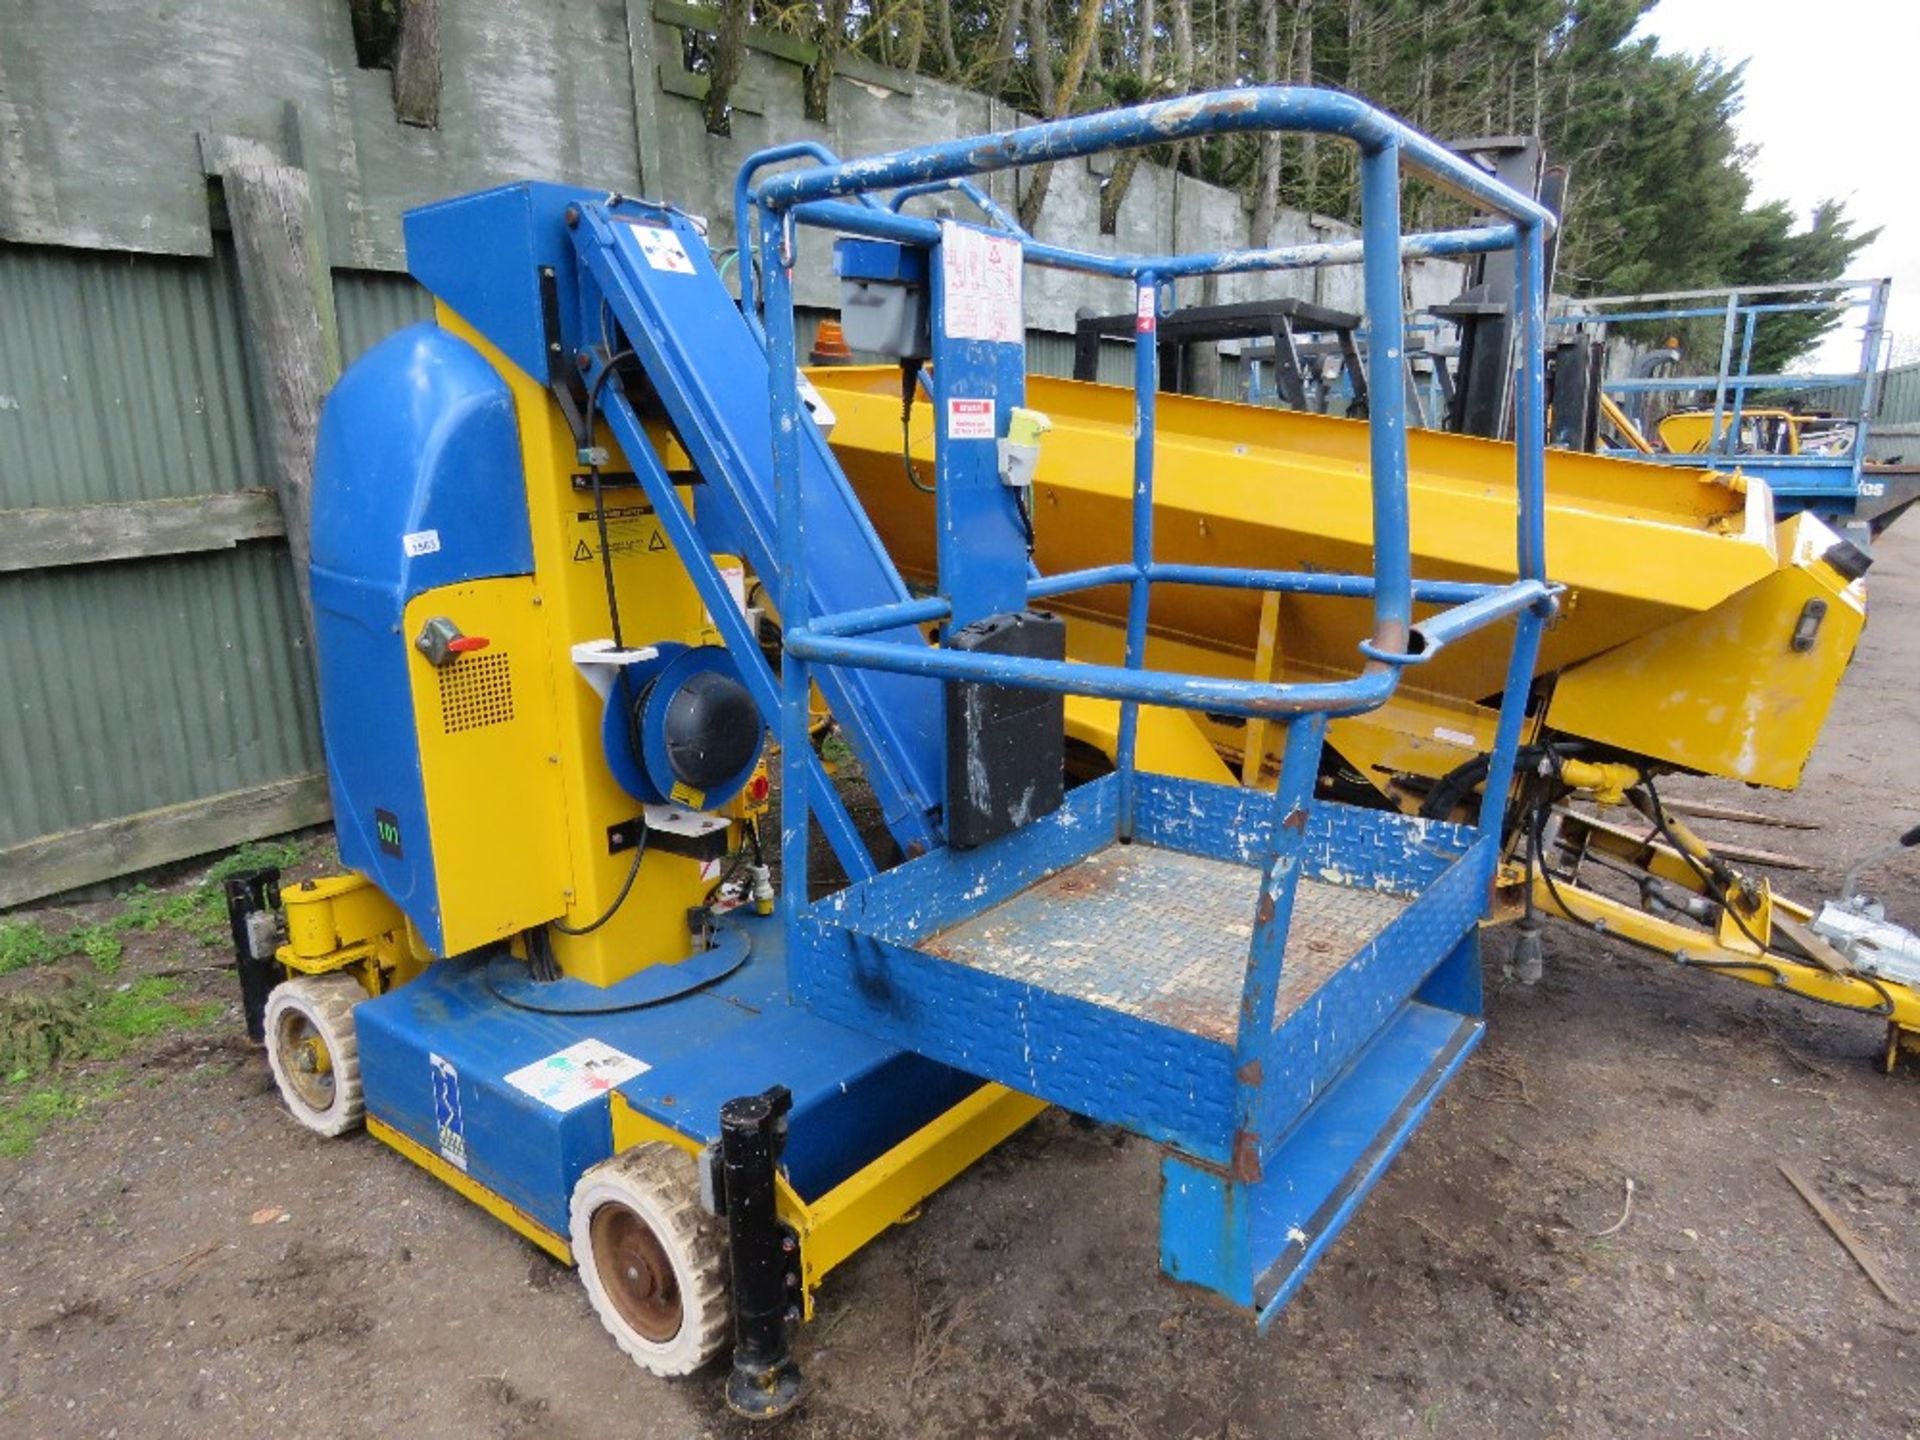 ABM ORION 1000 SELF PROPELLED 10 METRE MAST ACCESS LIFT UNIT WITH OUTRIGGERS YEAR 2001. SN:011006118